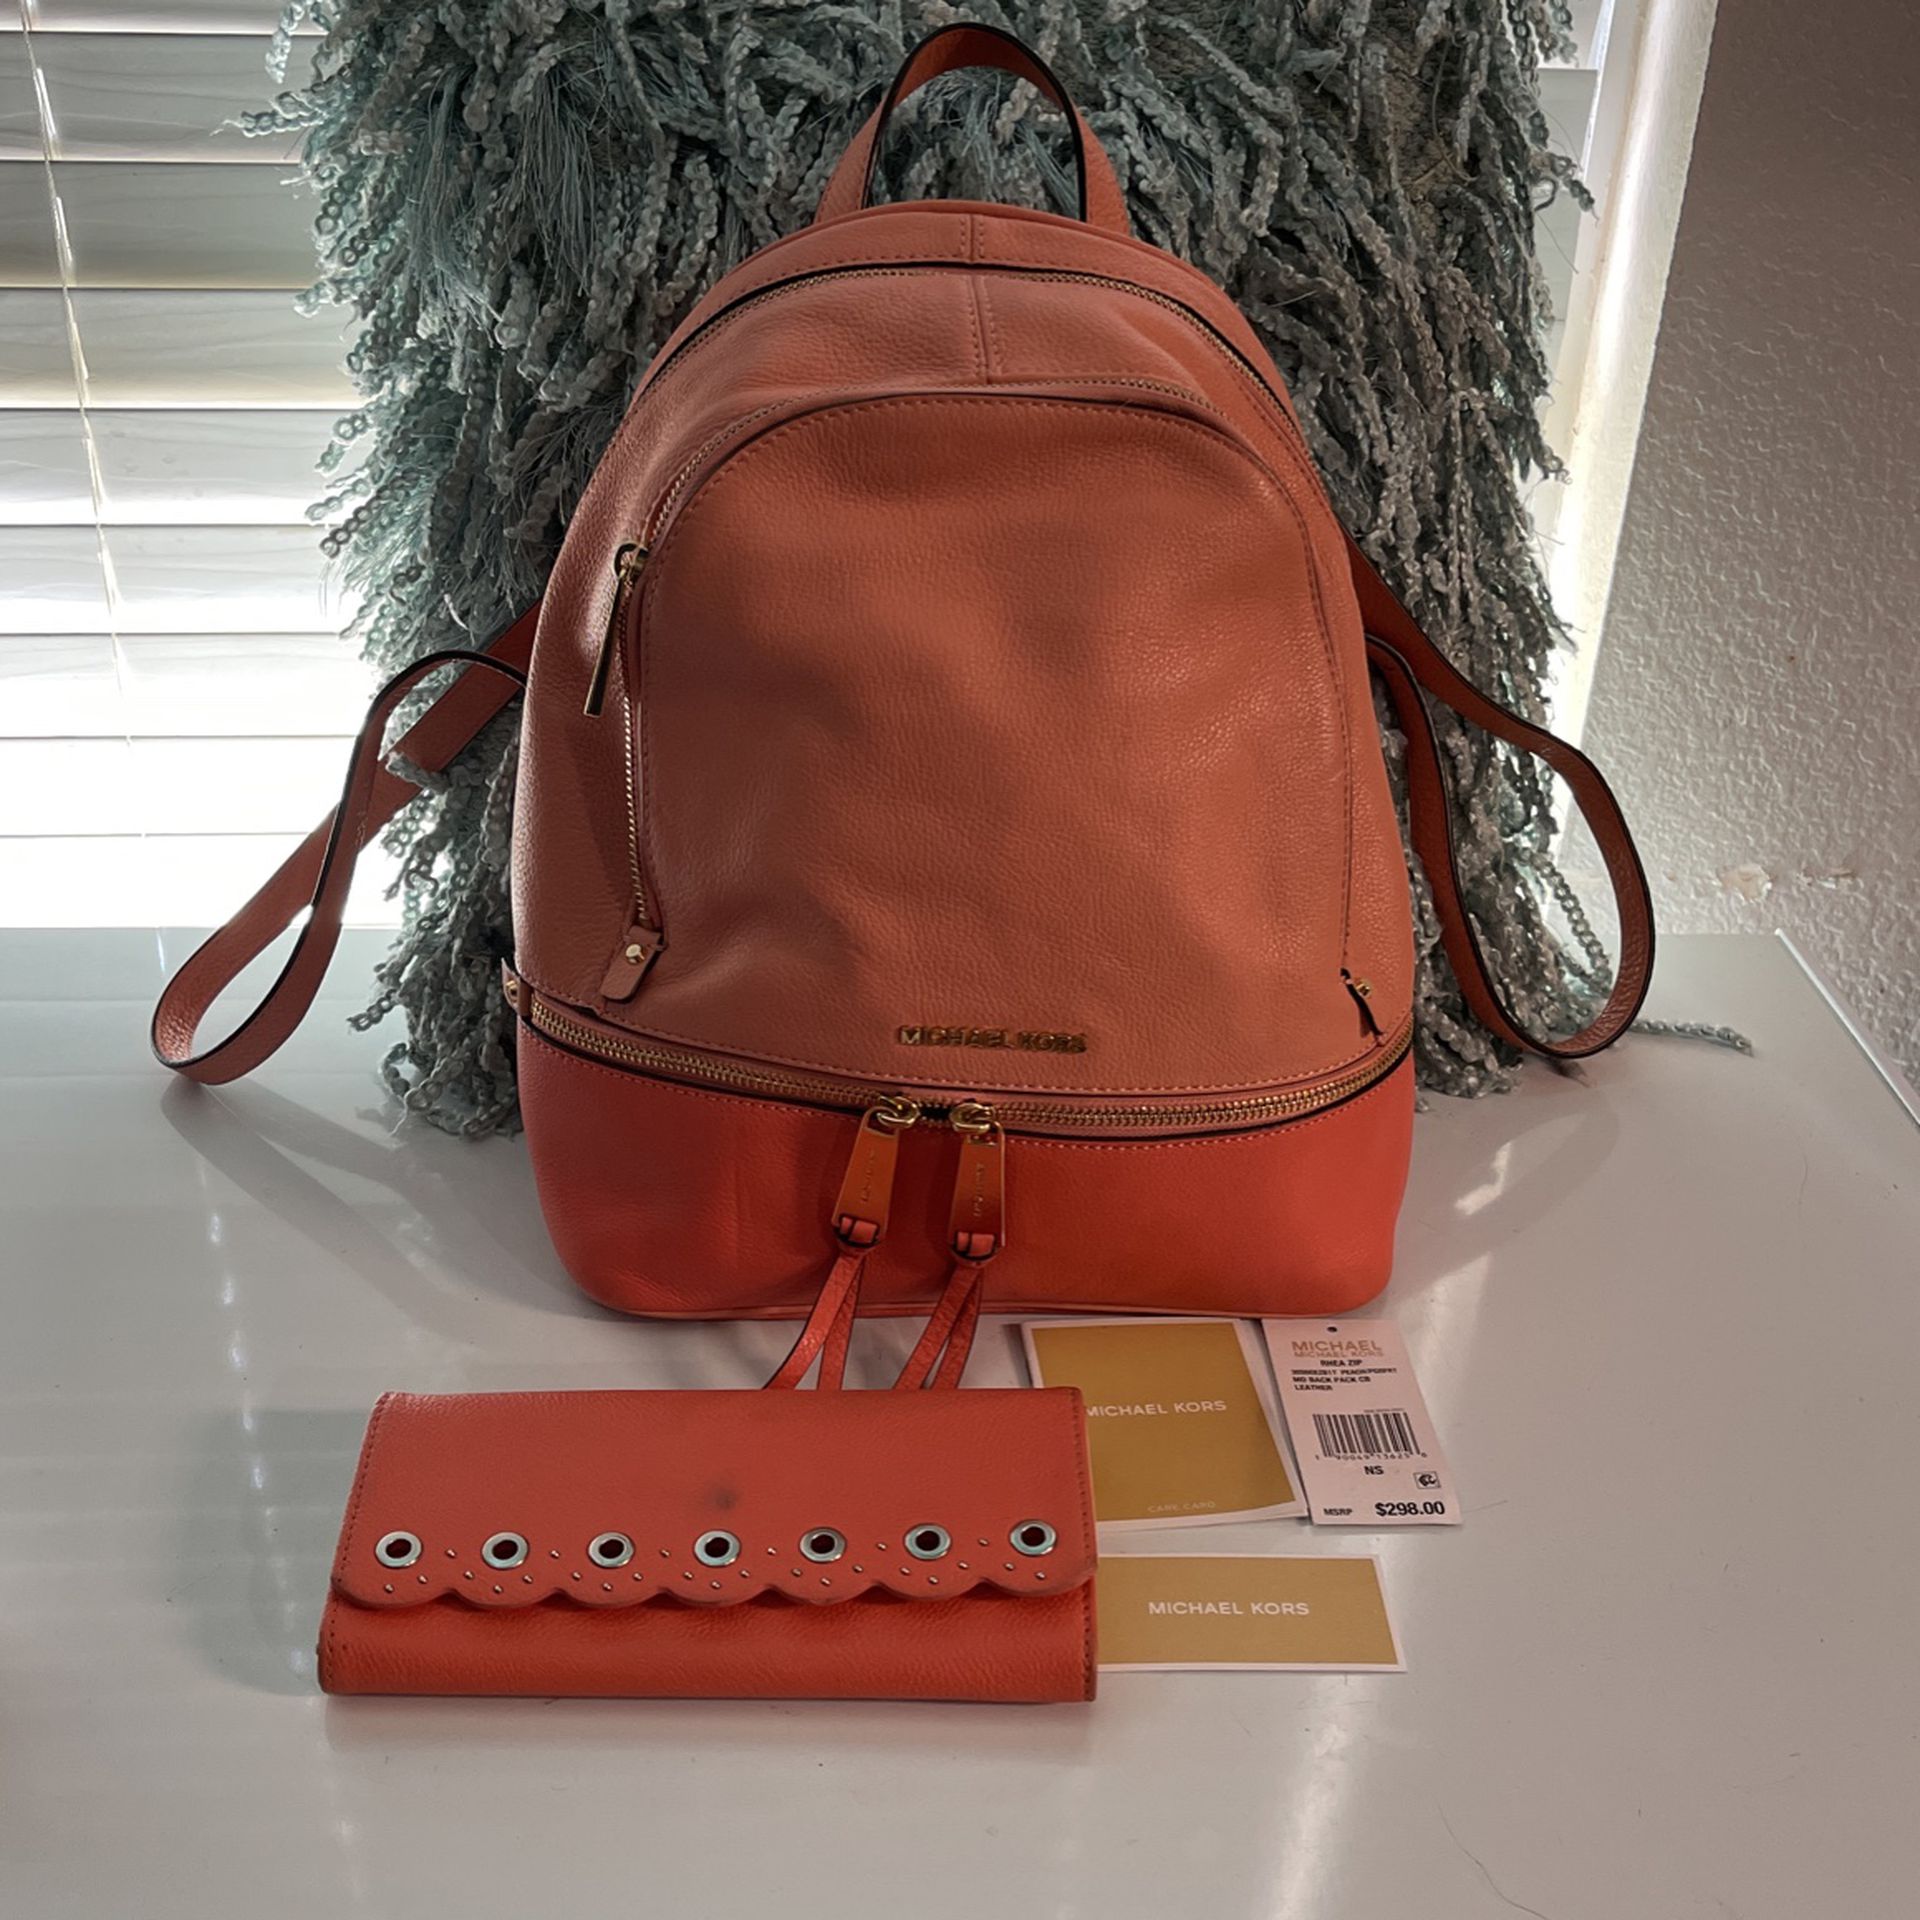 Michael Kors Backpack /Handbag With Matching Wallet for Sale in